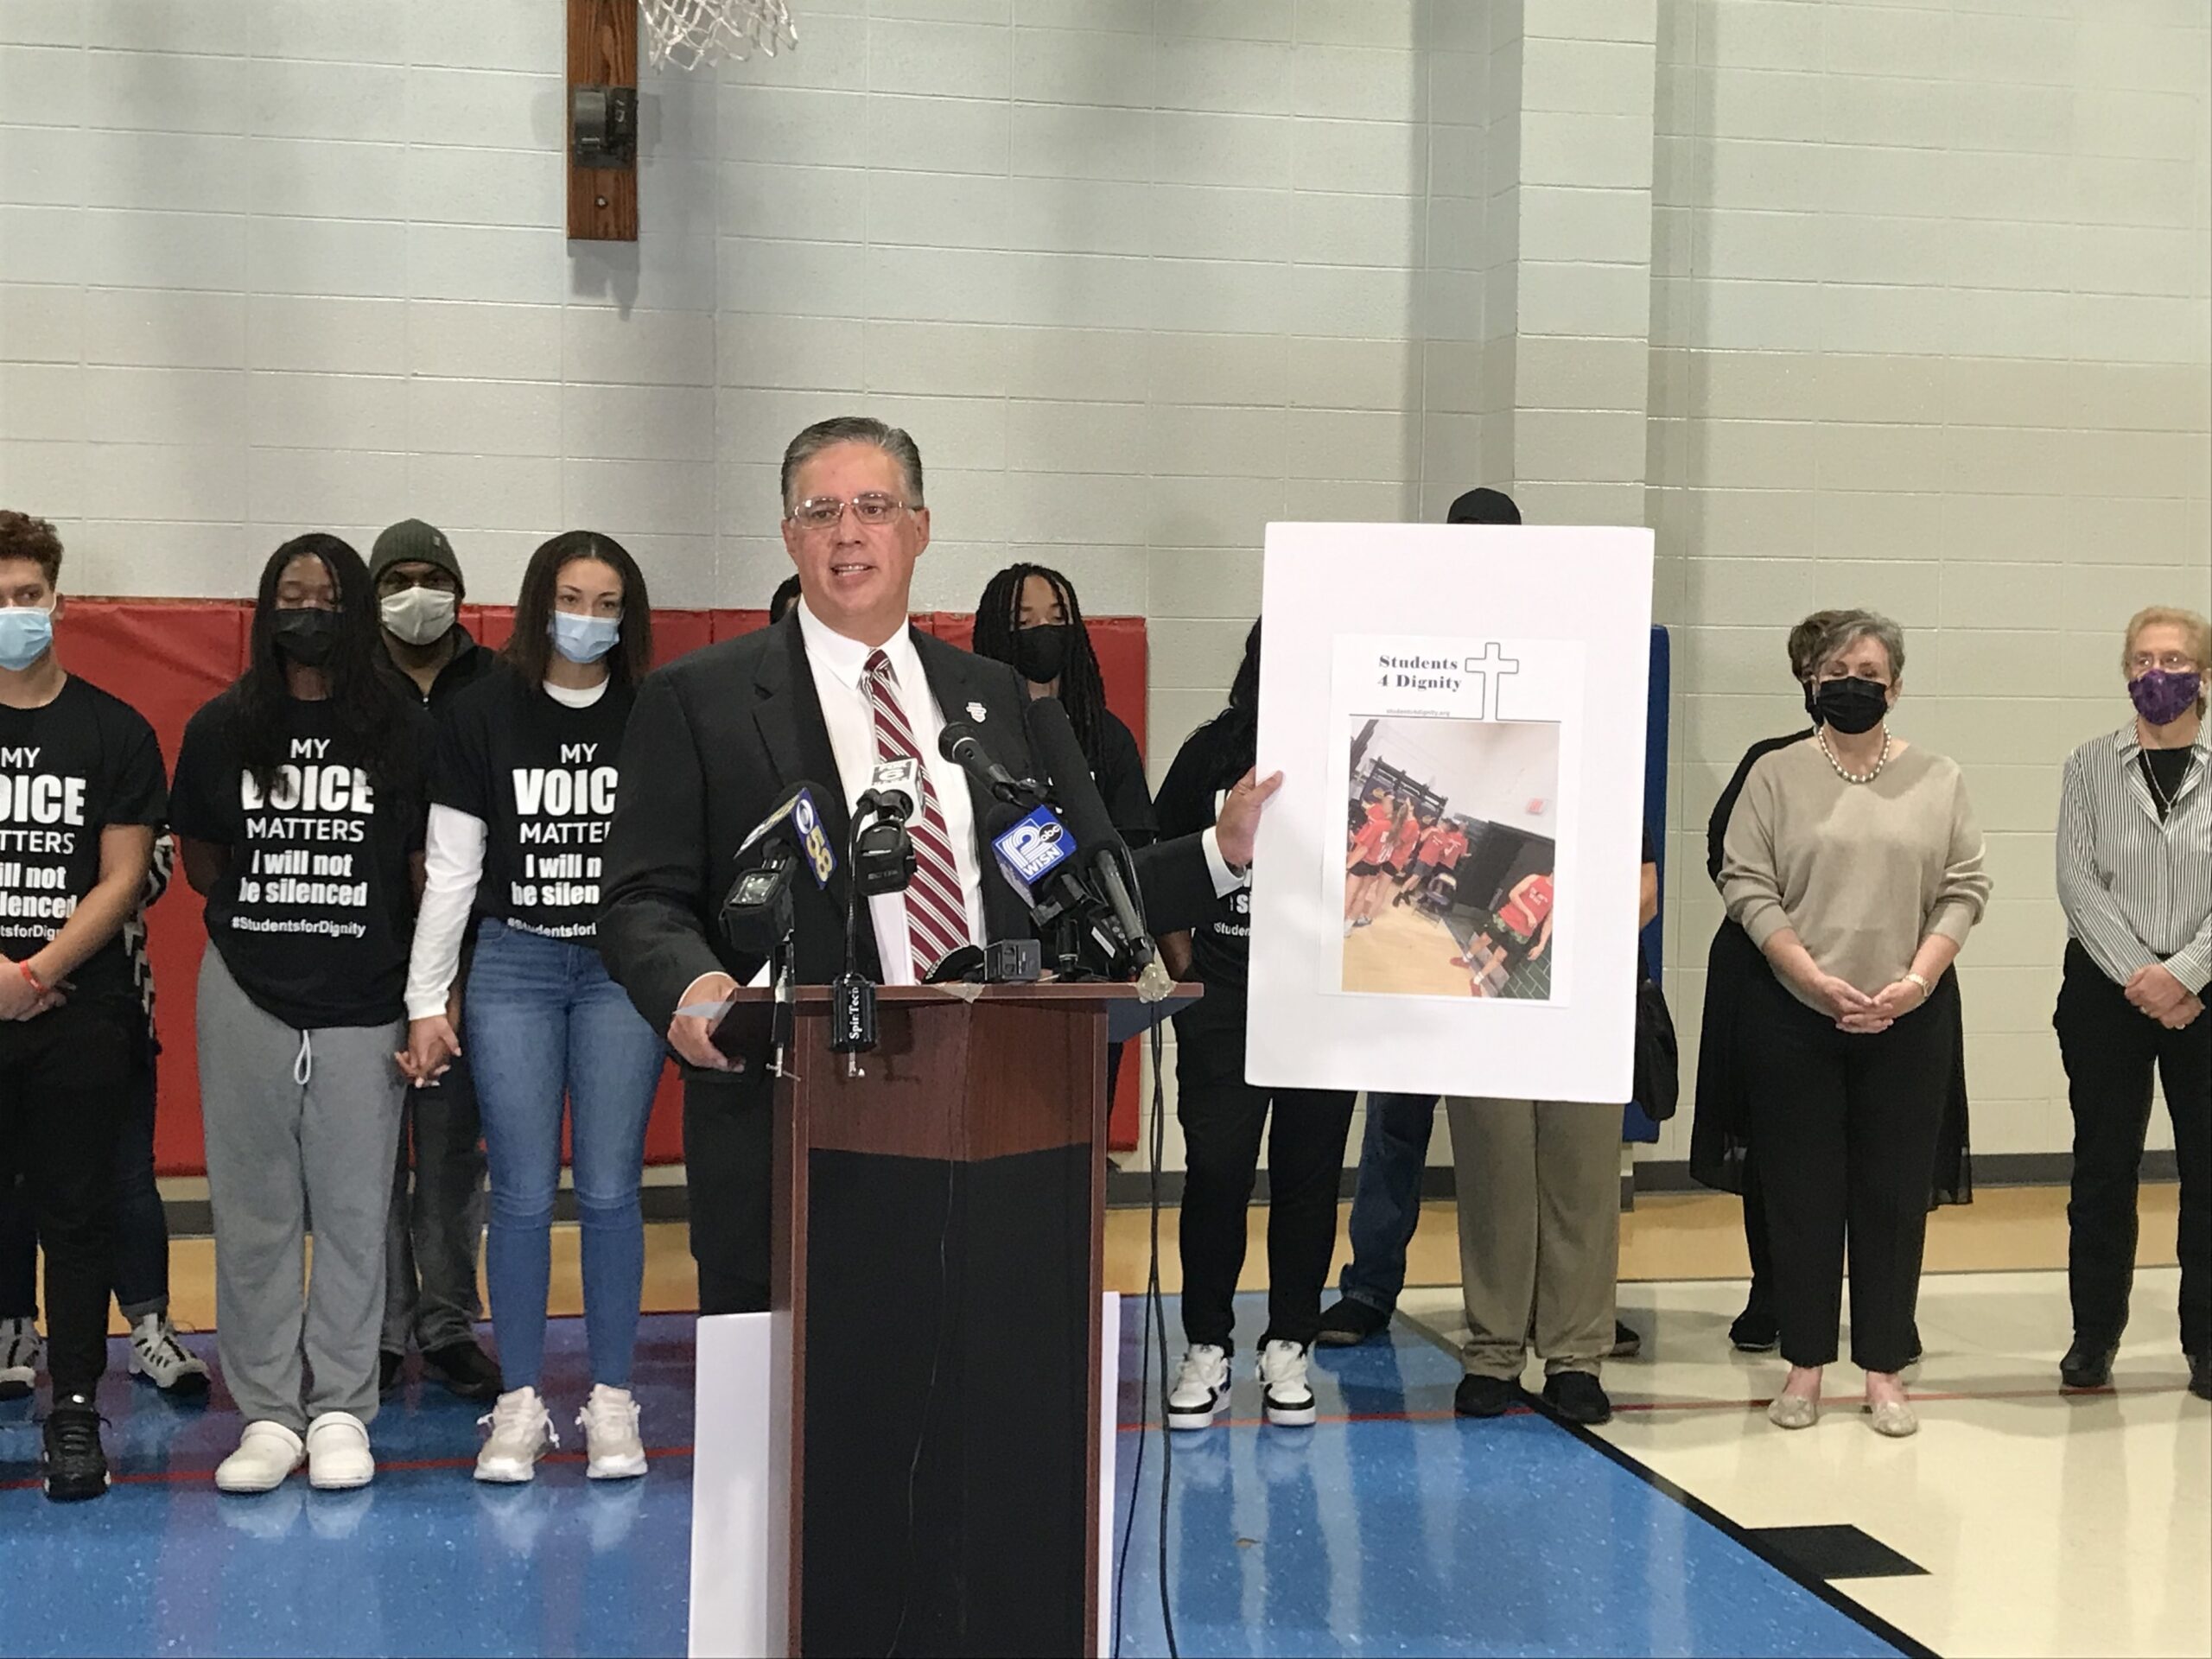 Forward Latino national president Darryl Morin holds up a photo of Racine Lutheran High School students wearing "Build the Wall" t-shirts as he describes incidents of racial harassment directed at Black and Latino students at the school.